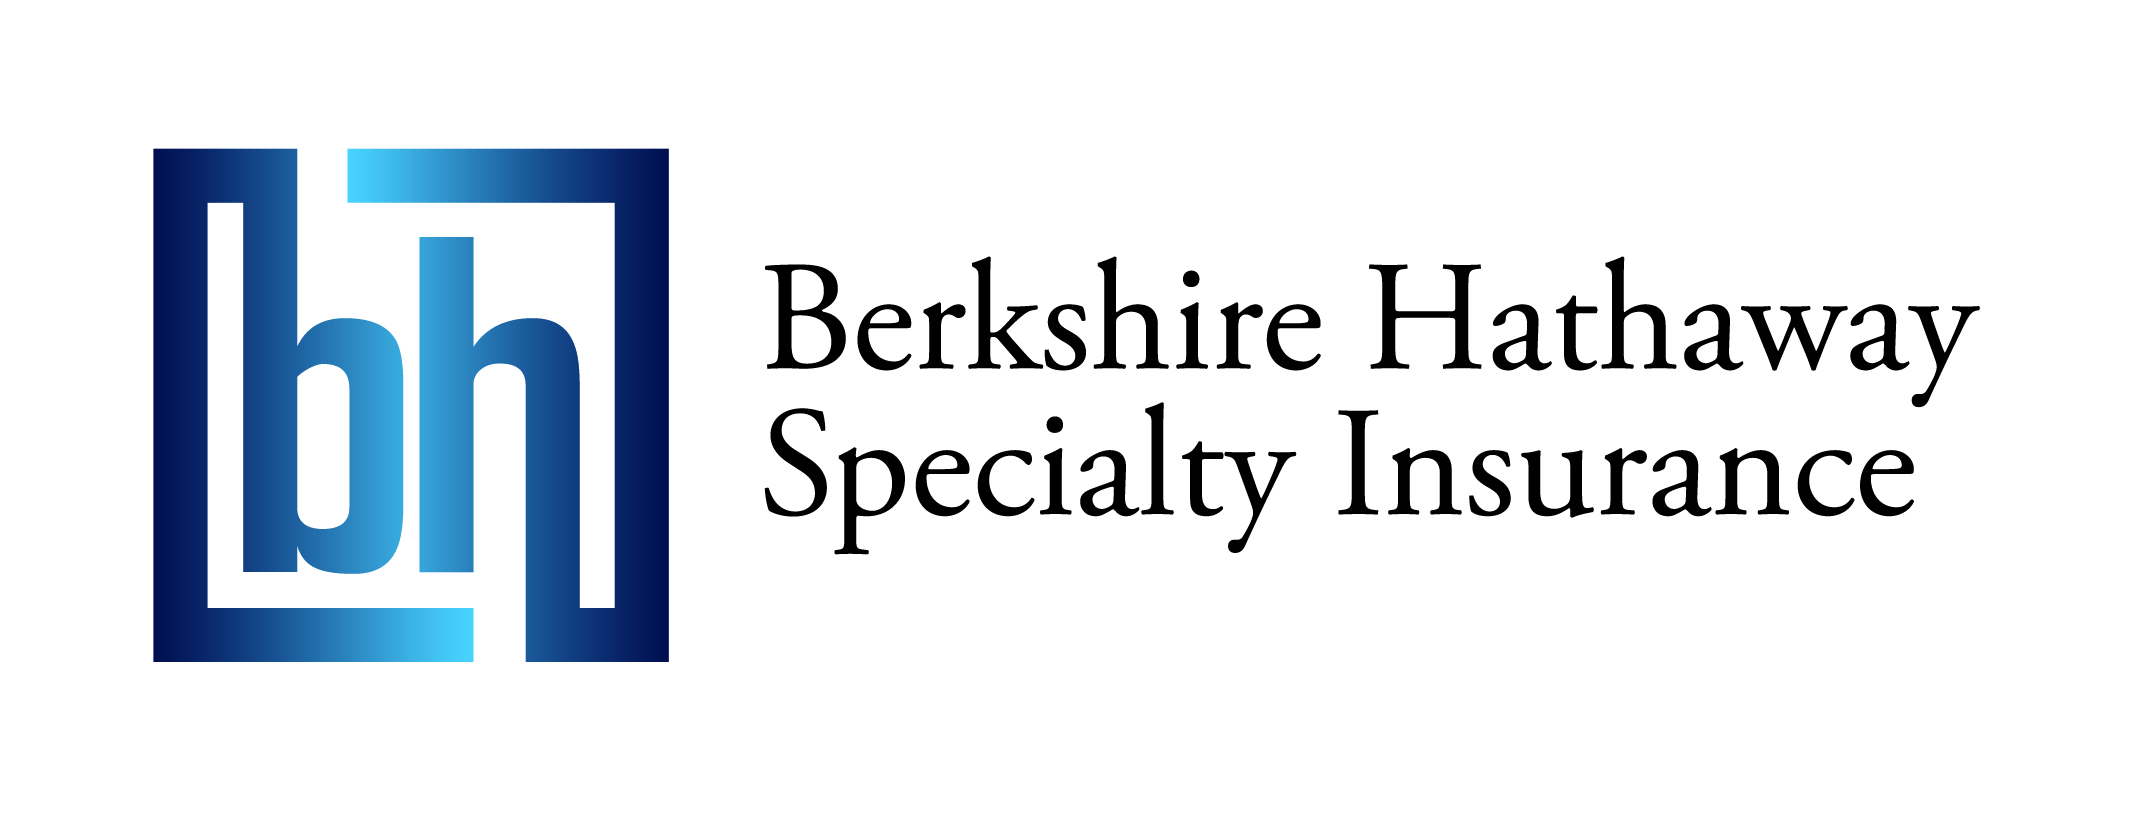 Berkshire Hathaway Insurance Provides Key Claims & Leaders of Product ...